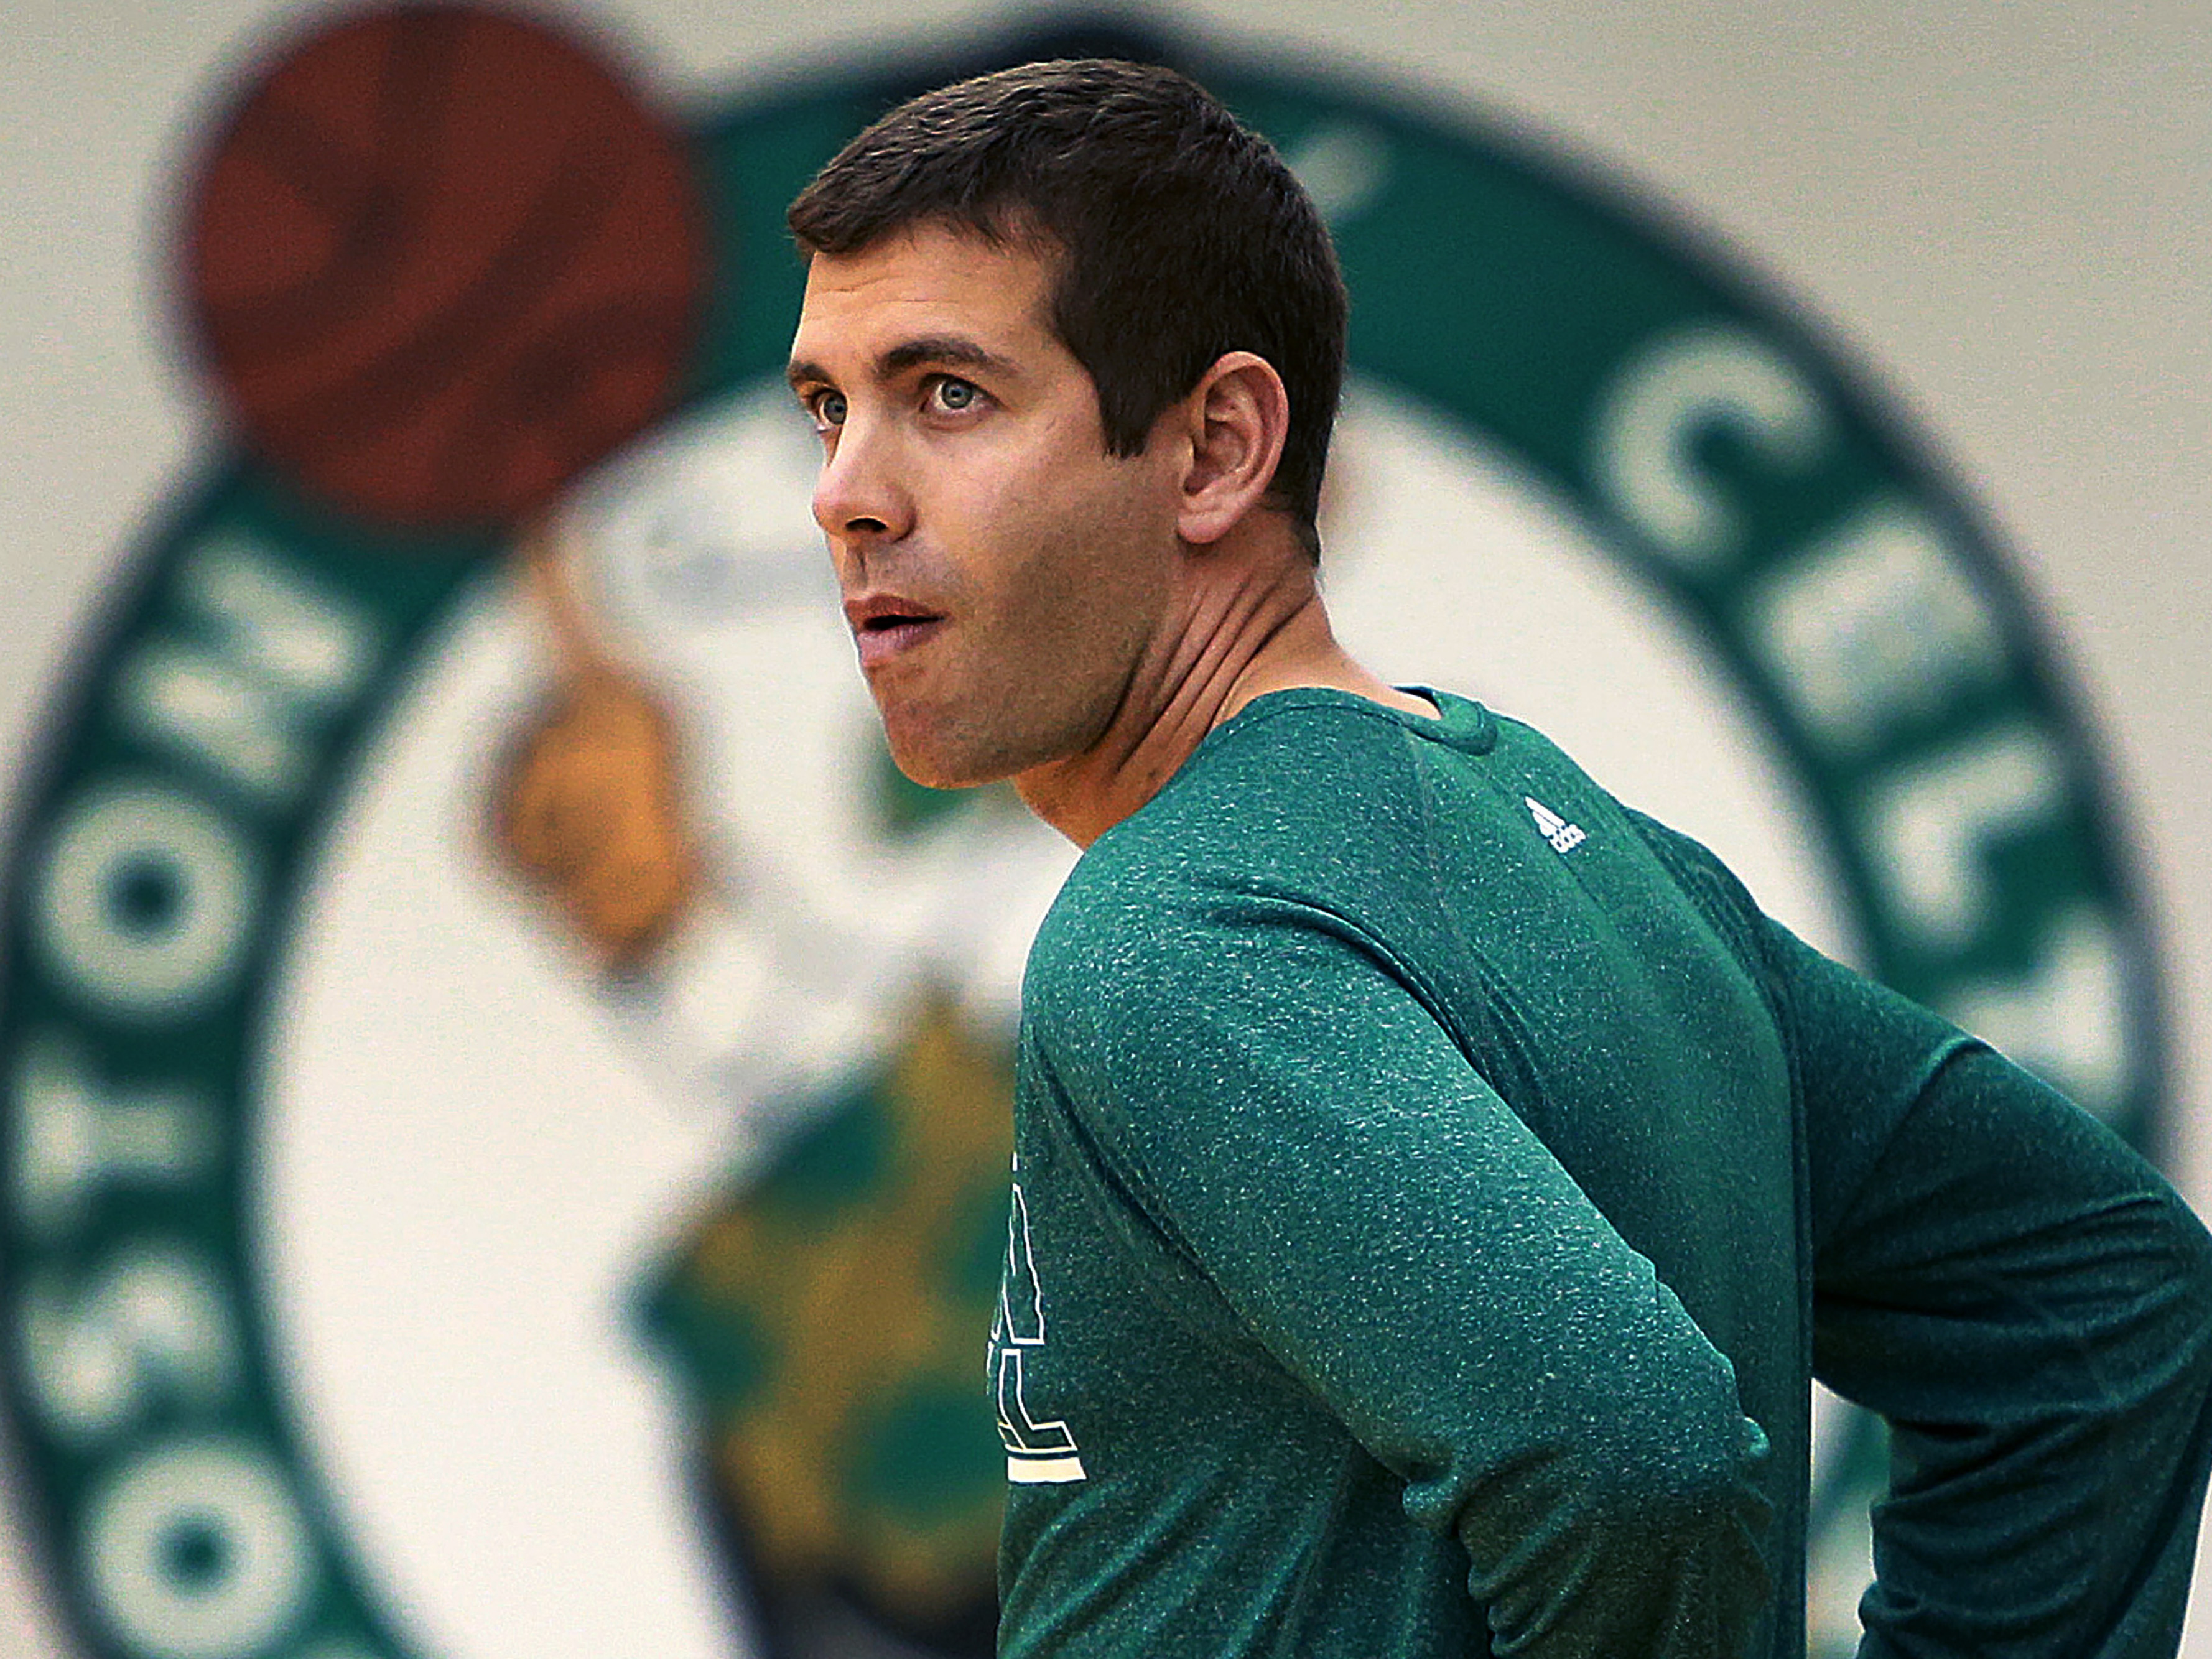 Brad Stevens needs to make some changes in his approach - The Boston Globe